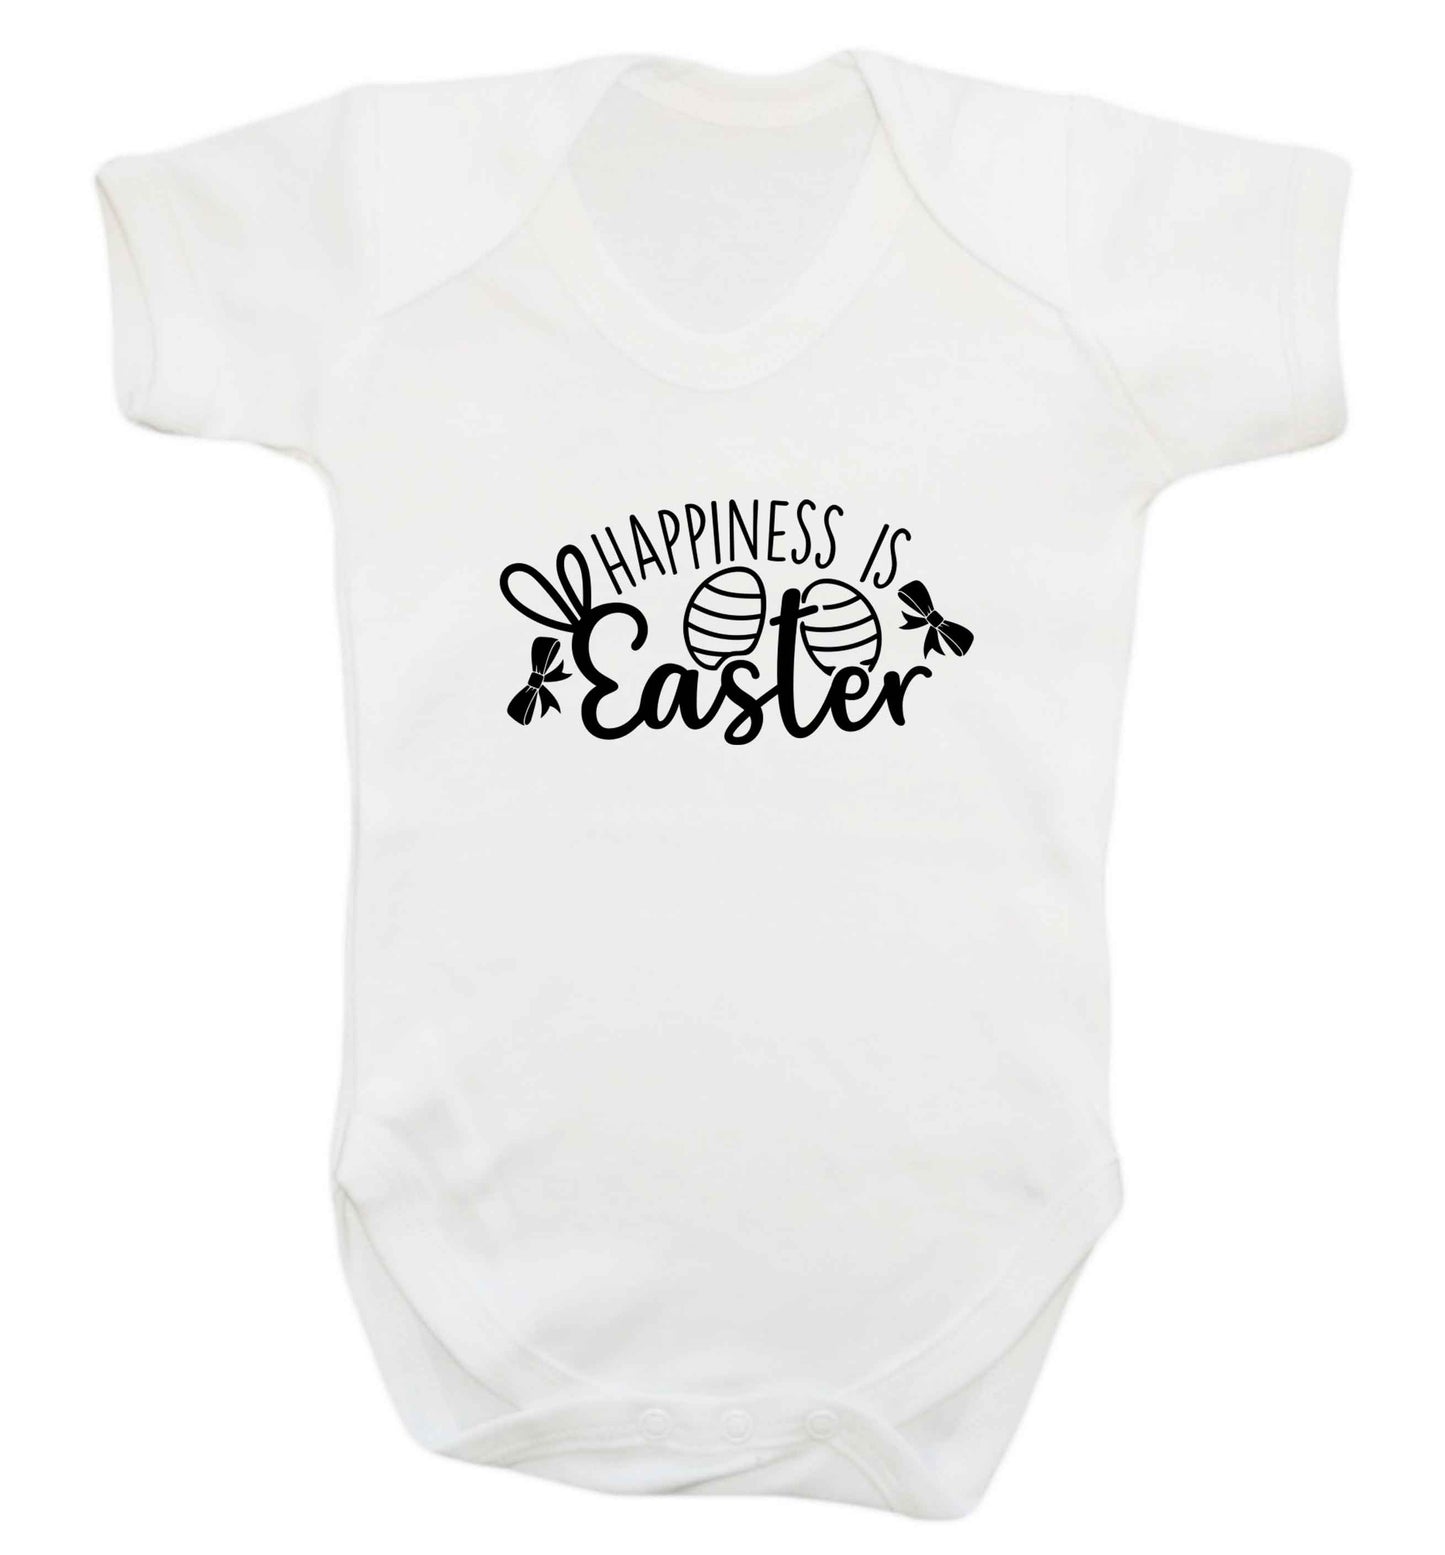 Happiness is easter baby vest white 18-24 months